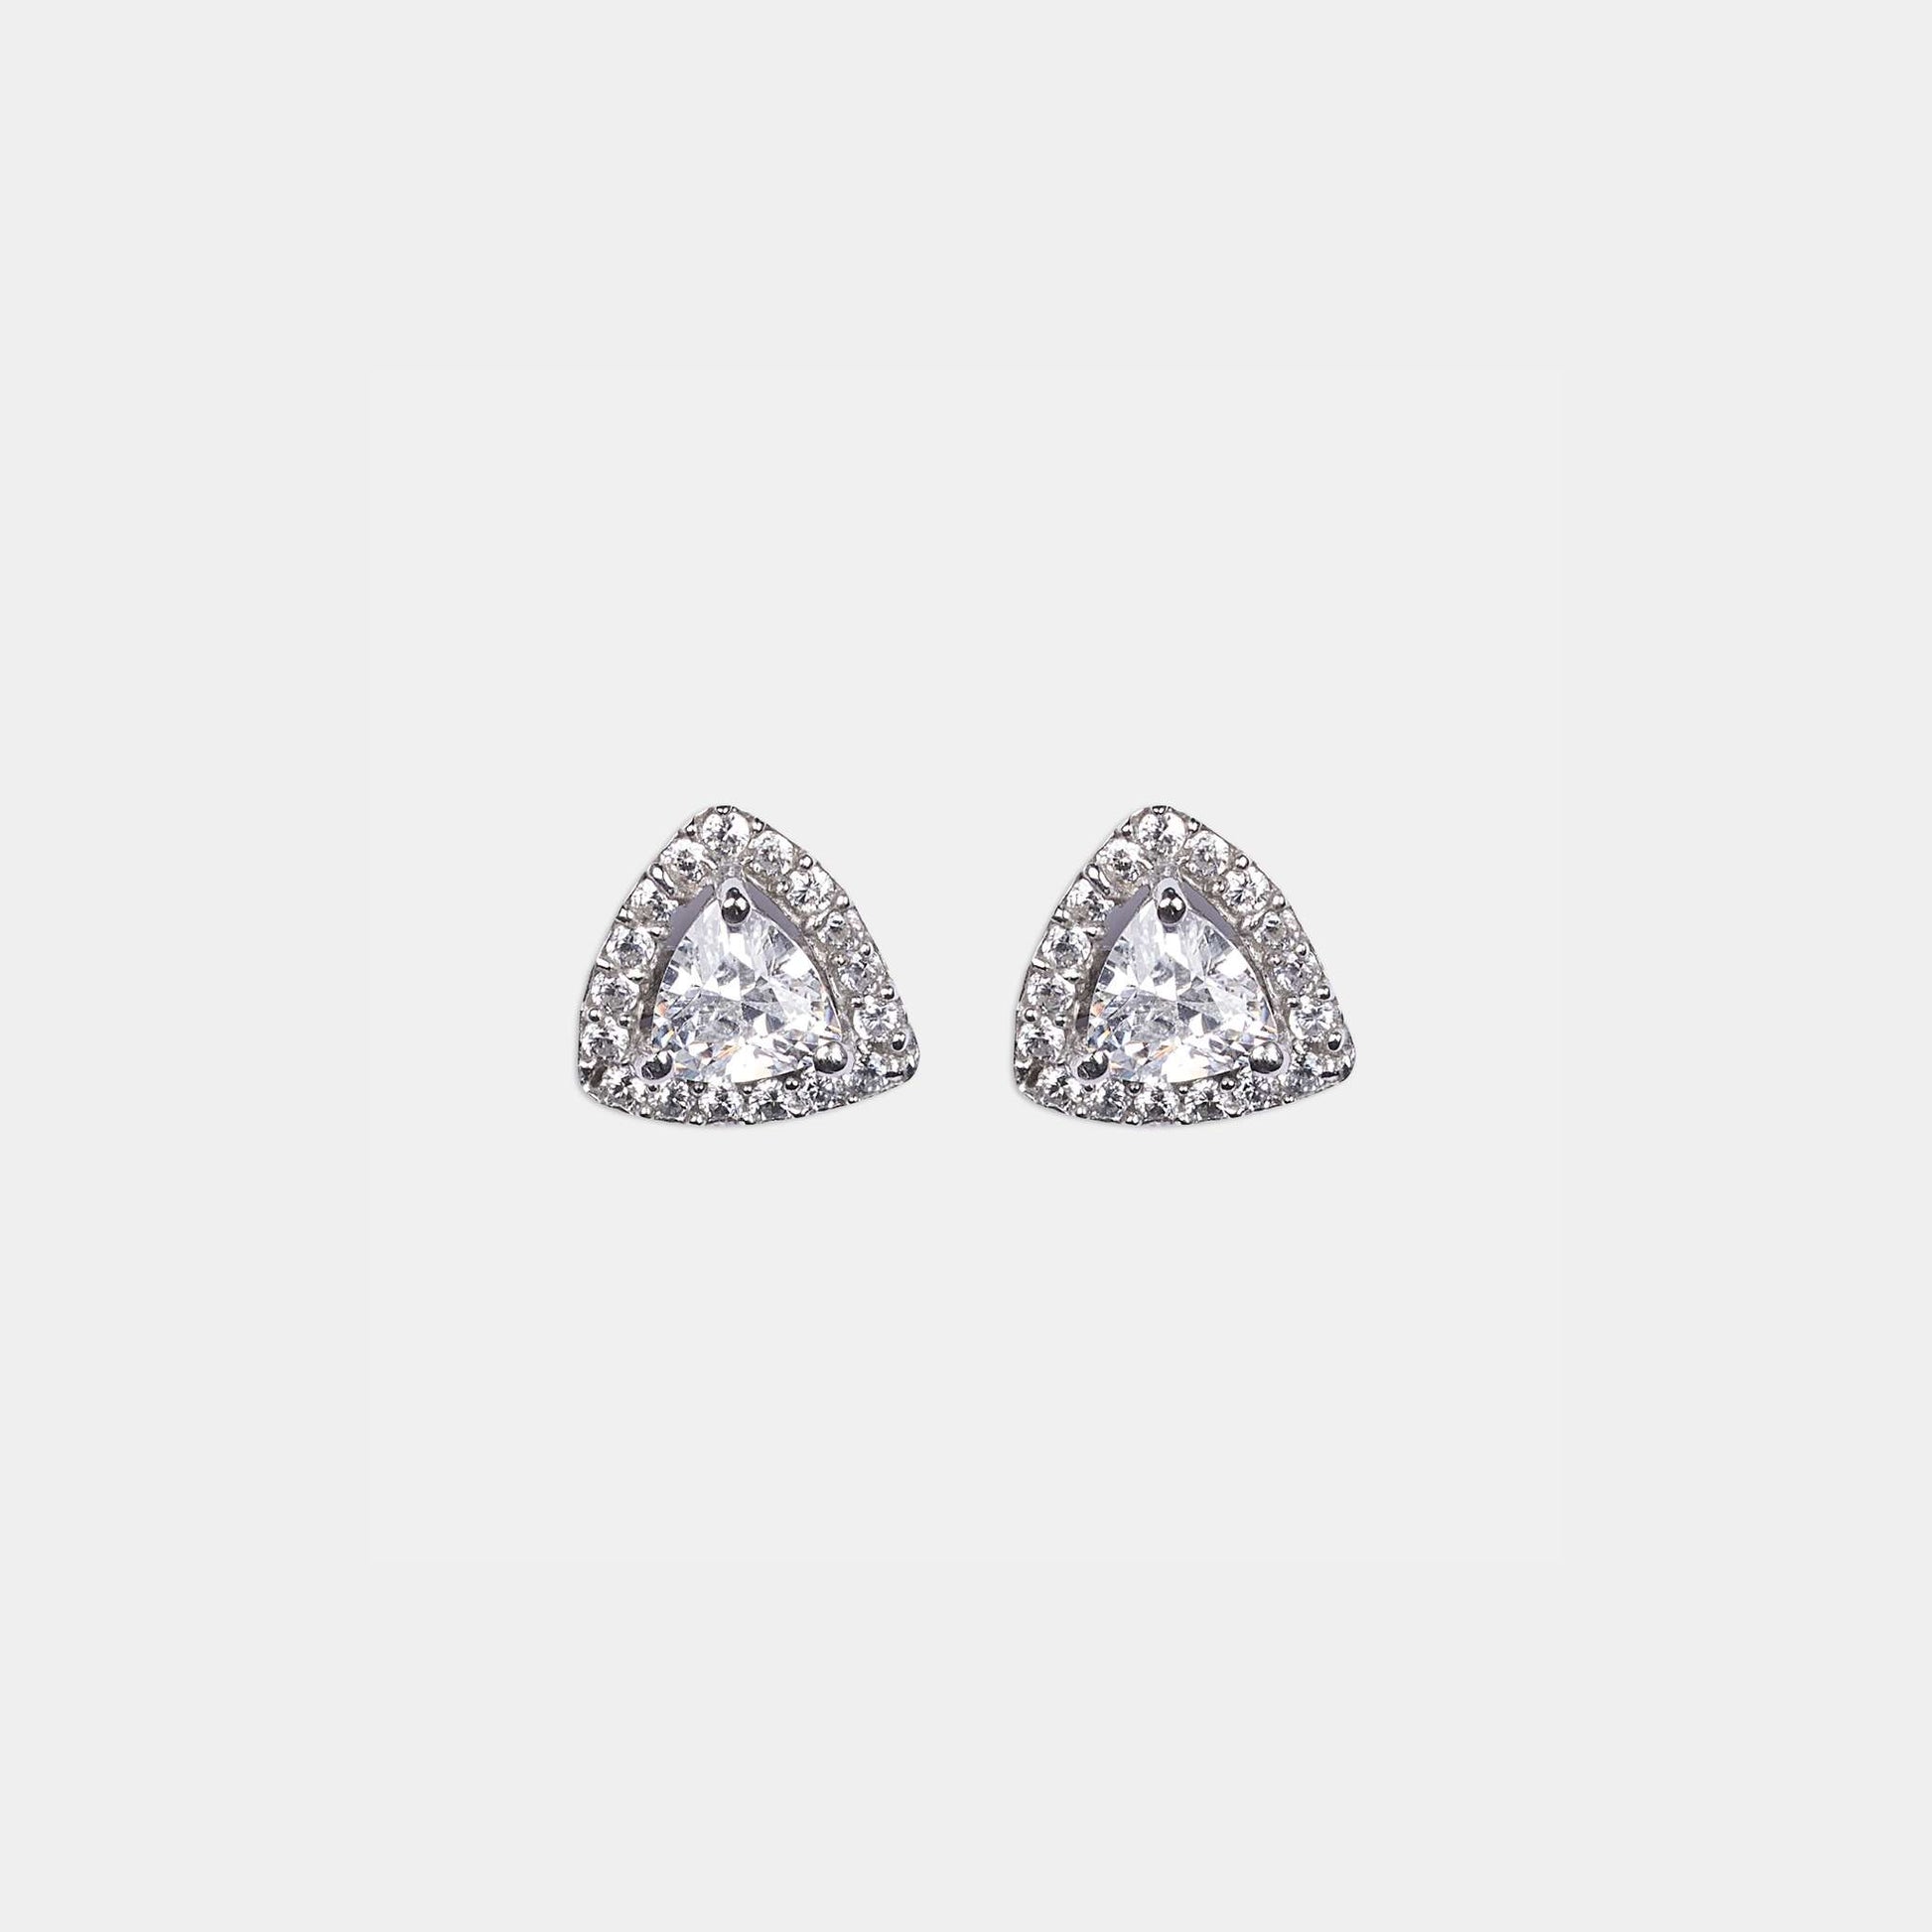 Elevate your style with our exquisite collection of triangle-shaped sterling silver earrings, designed to dazzle on every occasion.